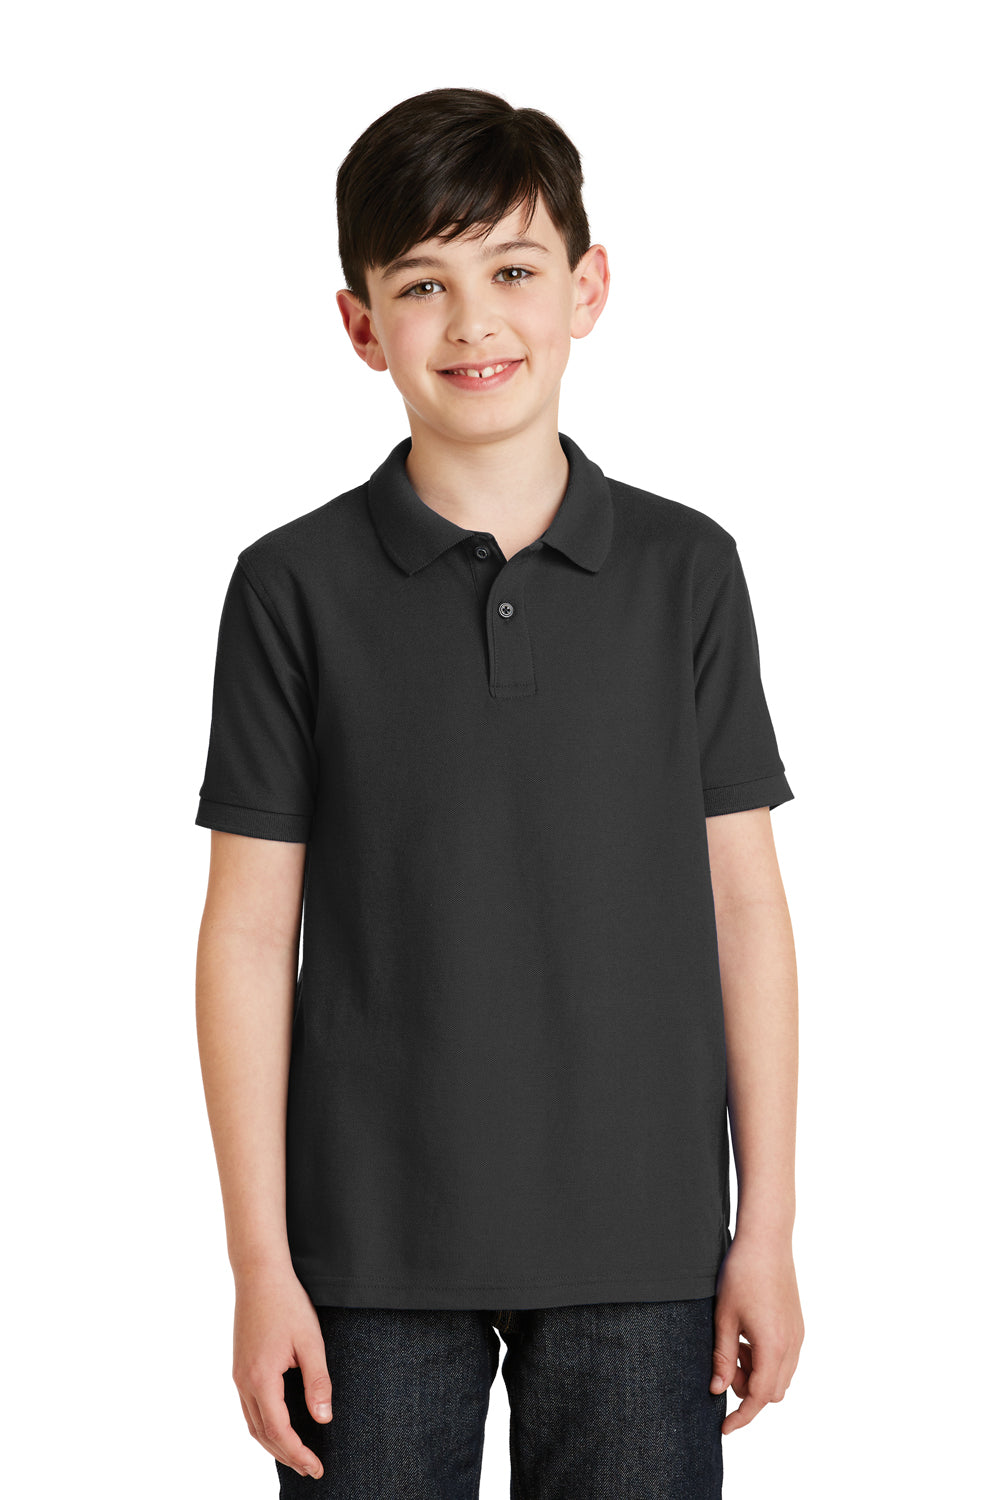 Port Authority Y500 Youth Silk Touch Wrinkle Resistant Short Sleeve Polo Shirt Black Front